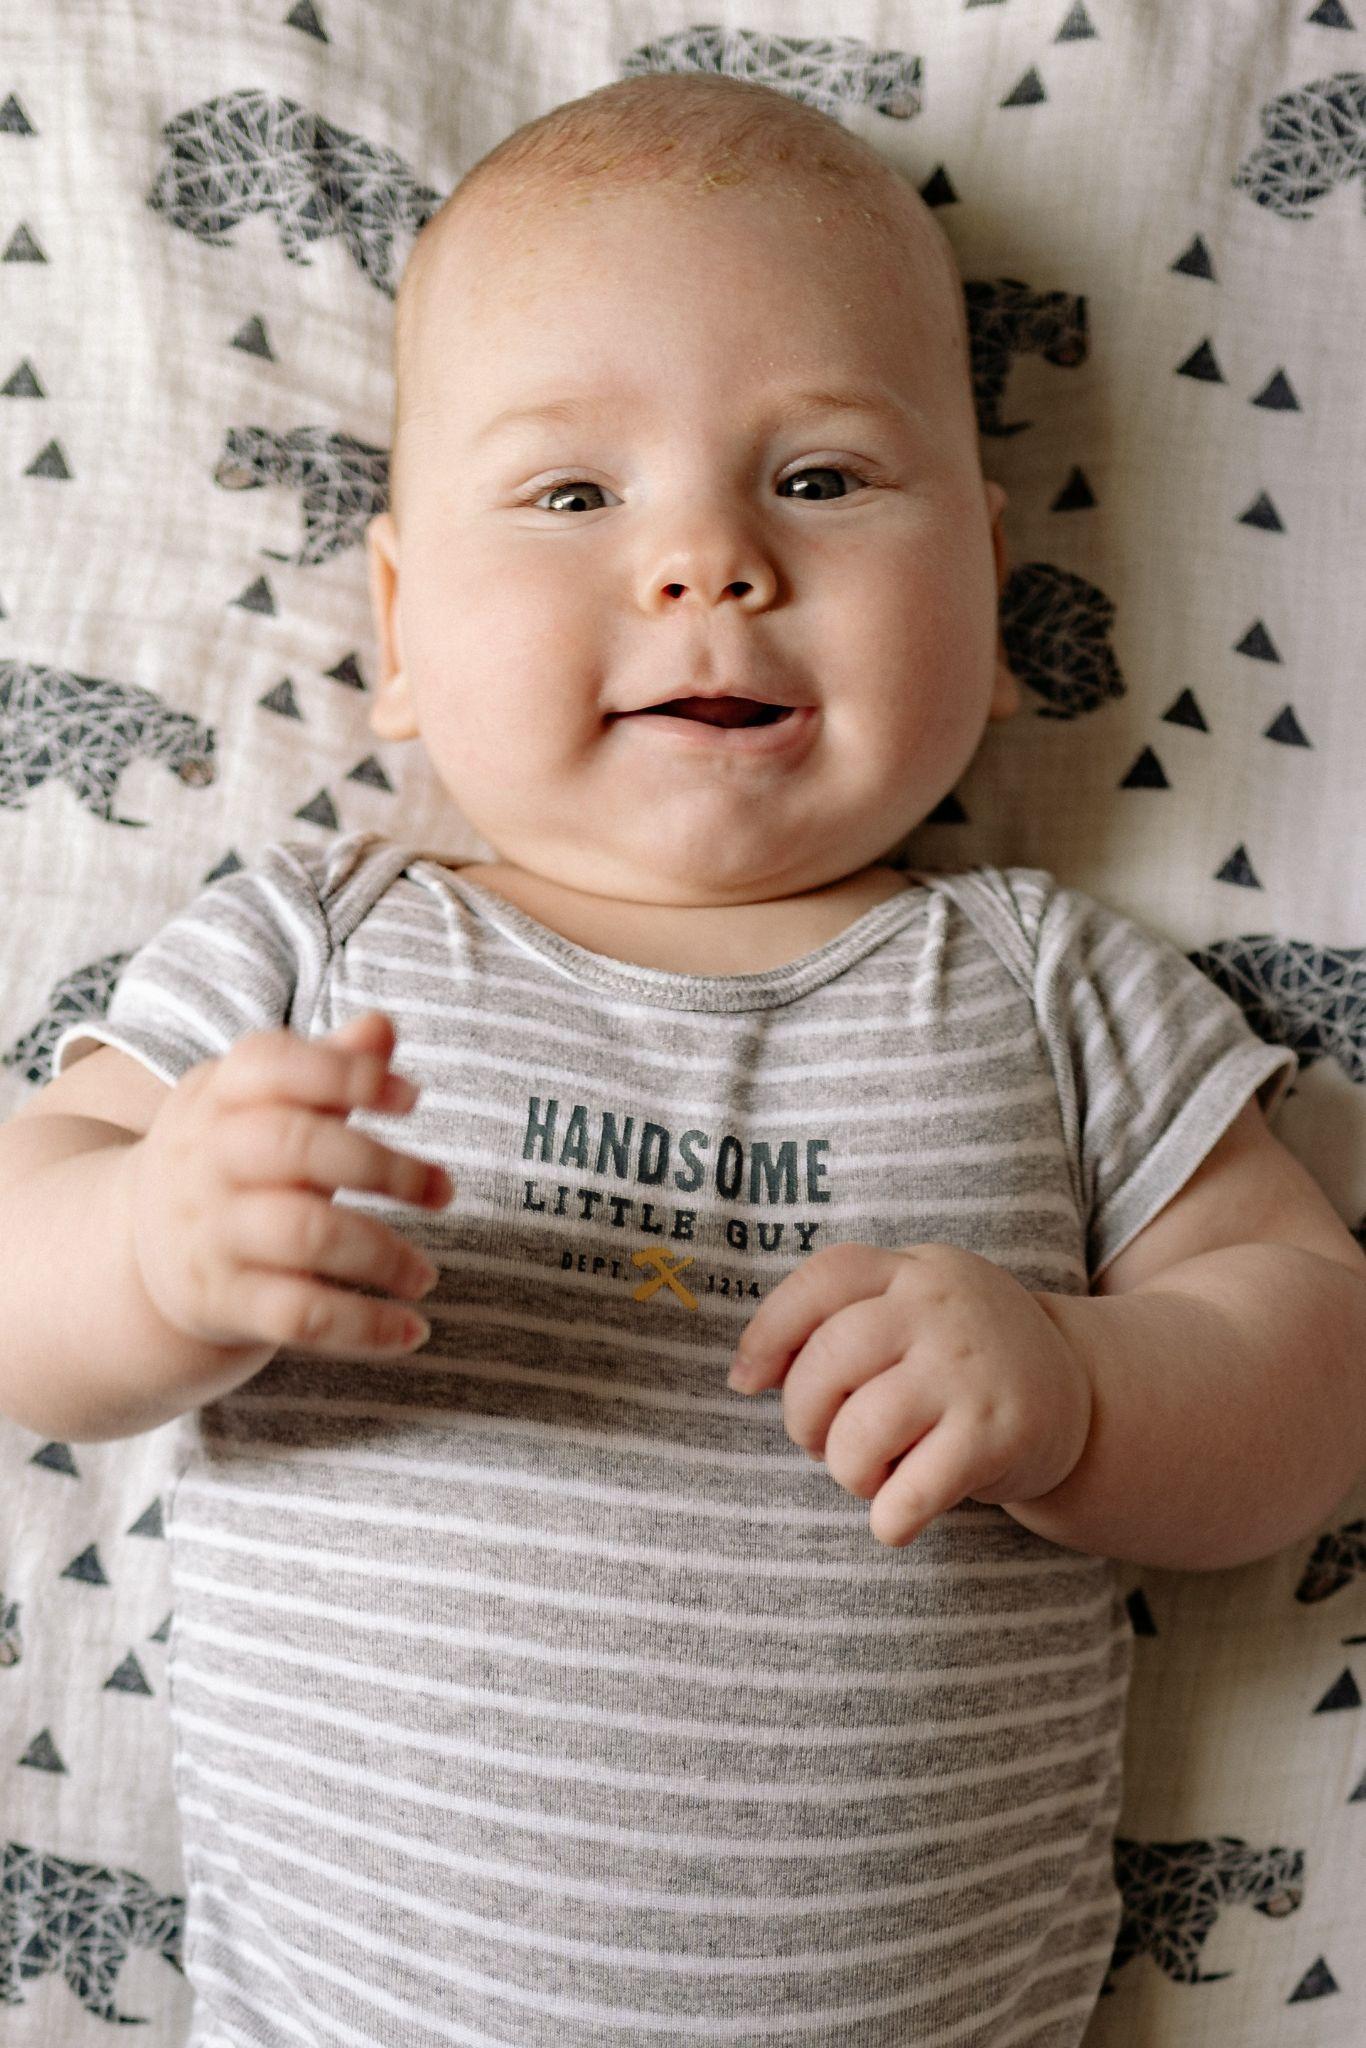 Baby boy wearing a onesie that included the sentence “handsome little guy” - Funny Baby Onesies - Baby Journey